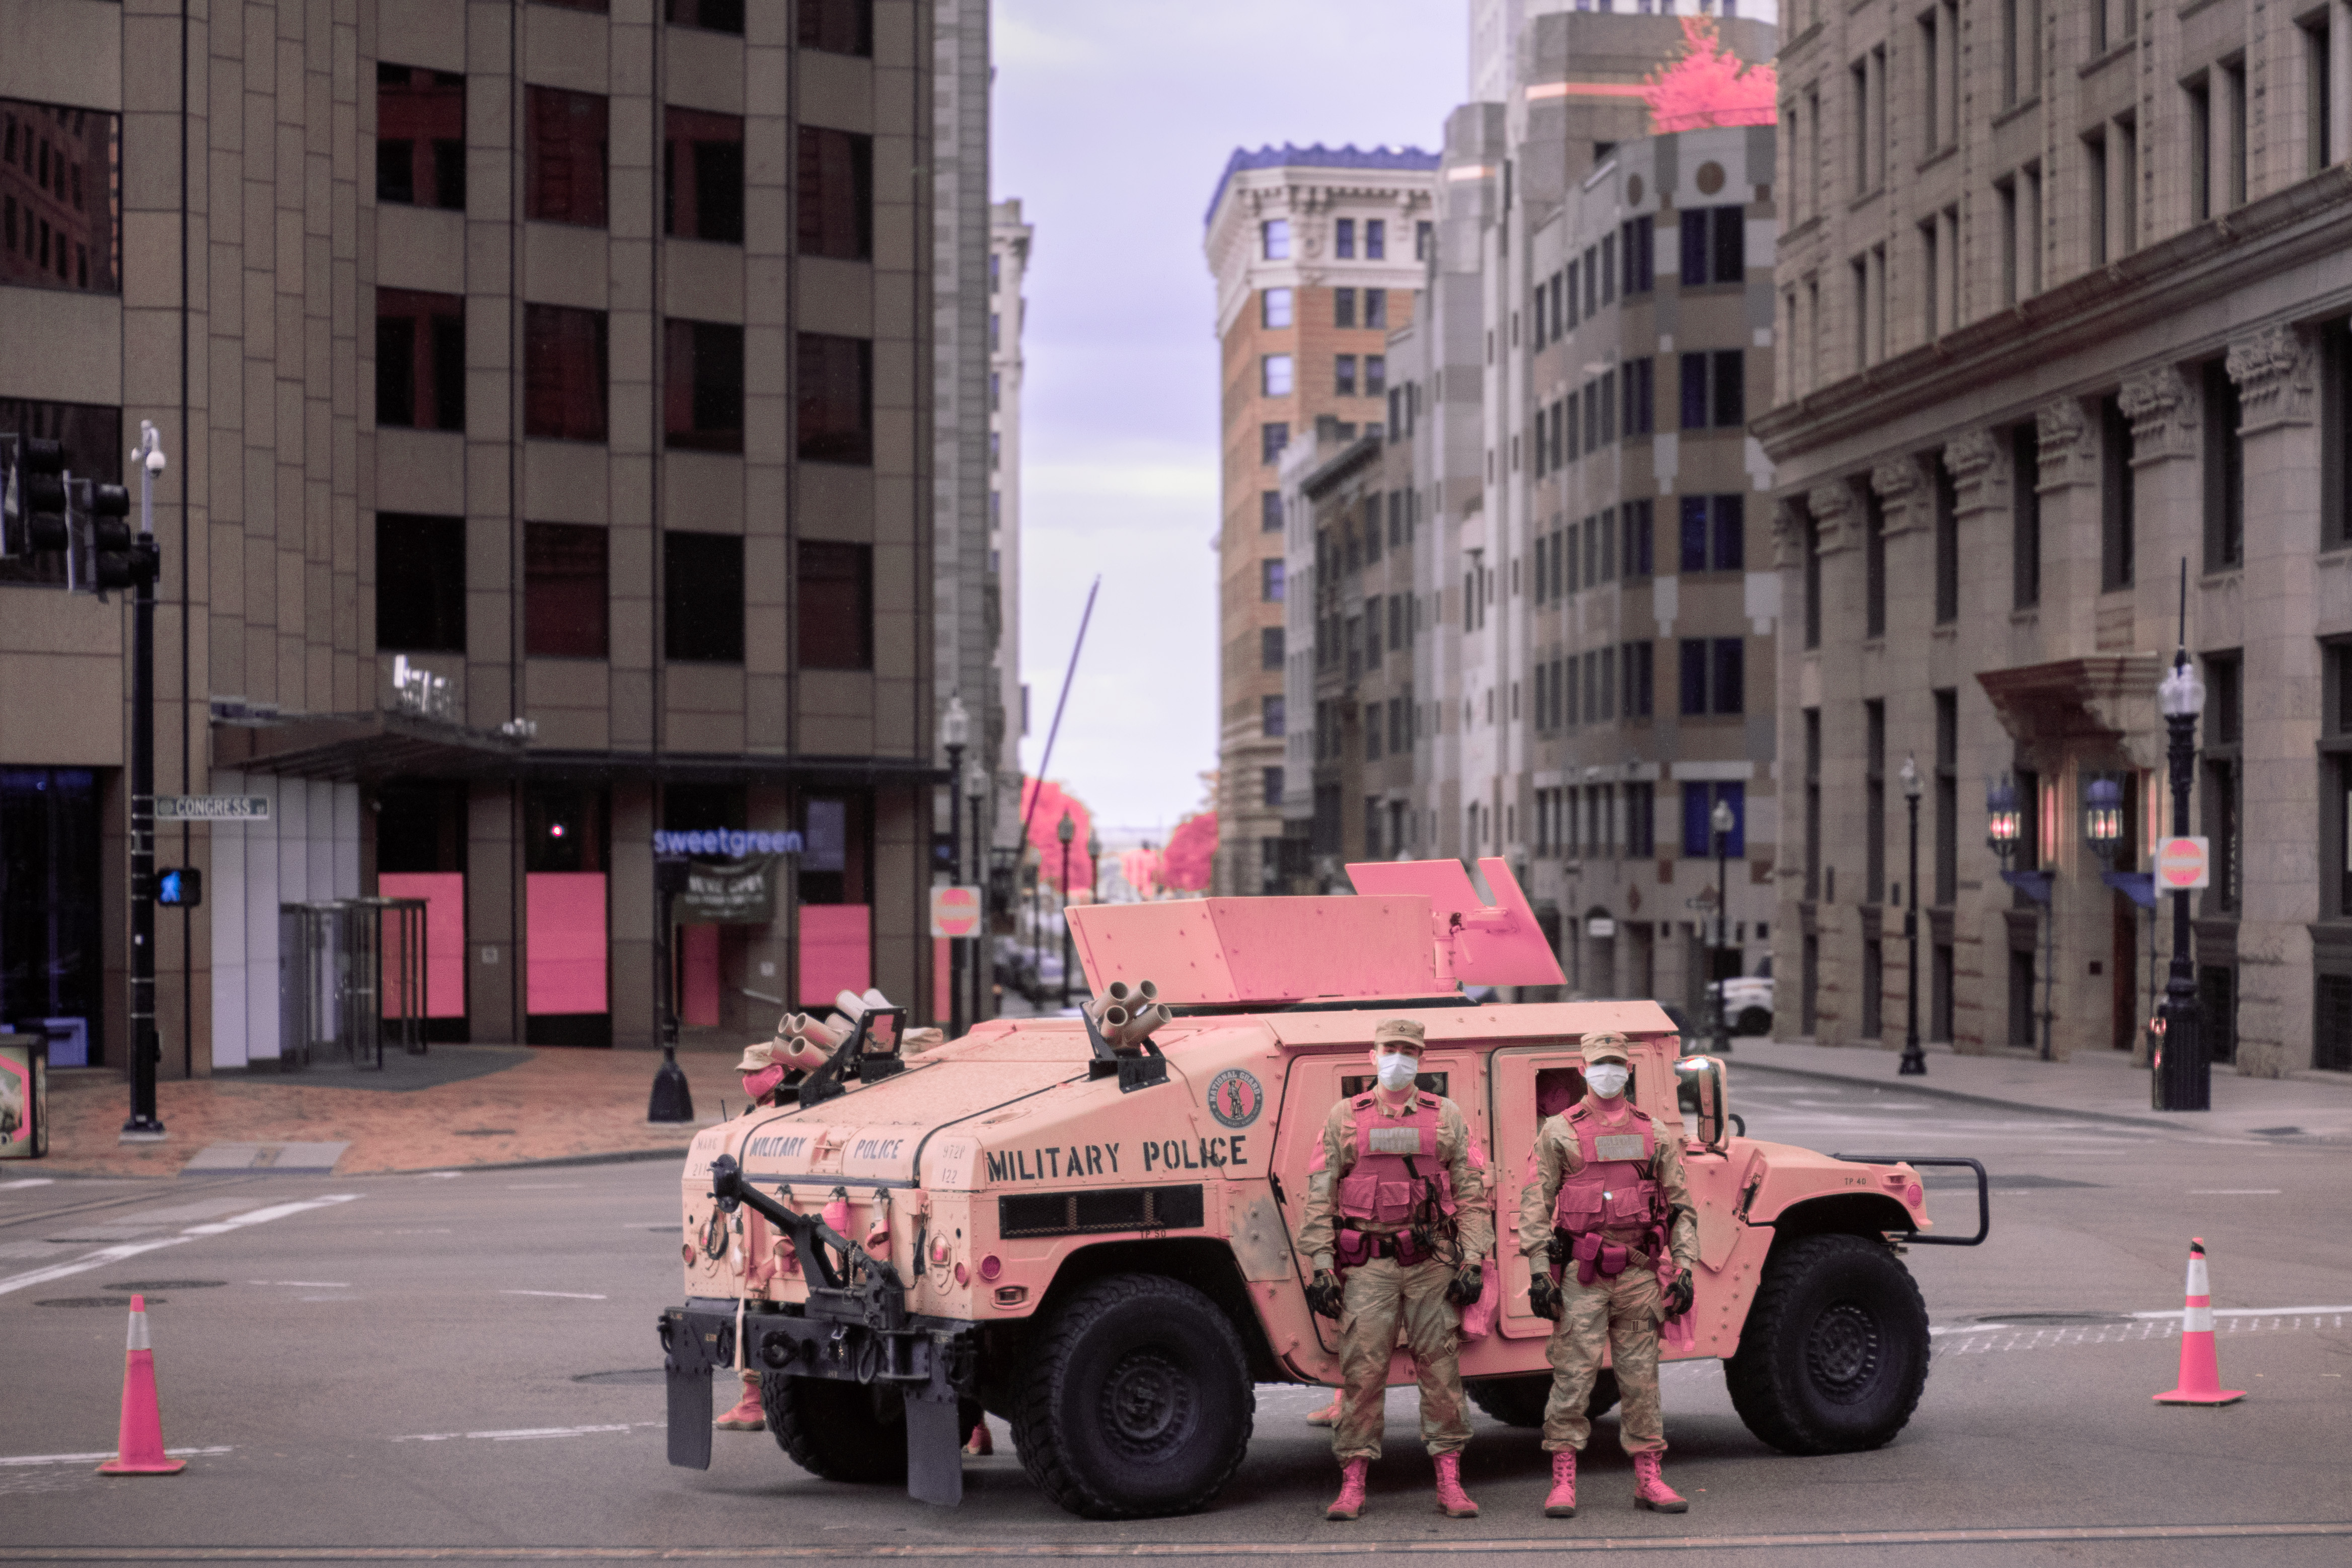 Photojournalism by the Boston photographer, David Degner. An infrared photograph of military police in Boston, Massachusetts.